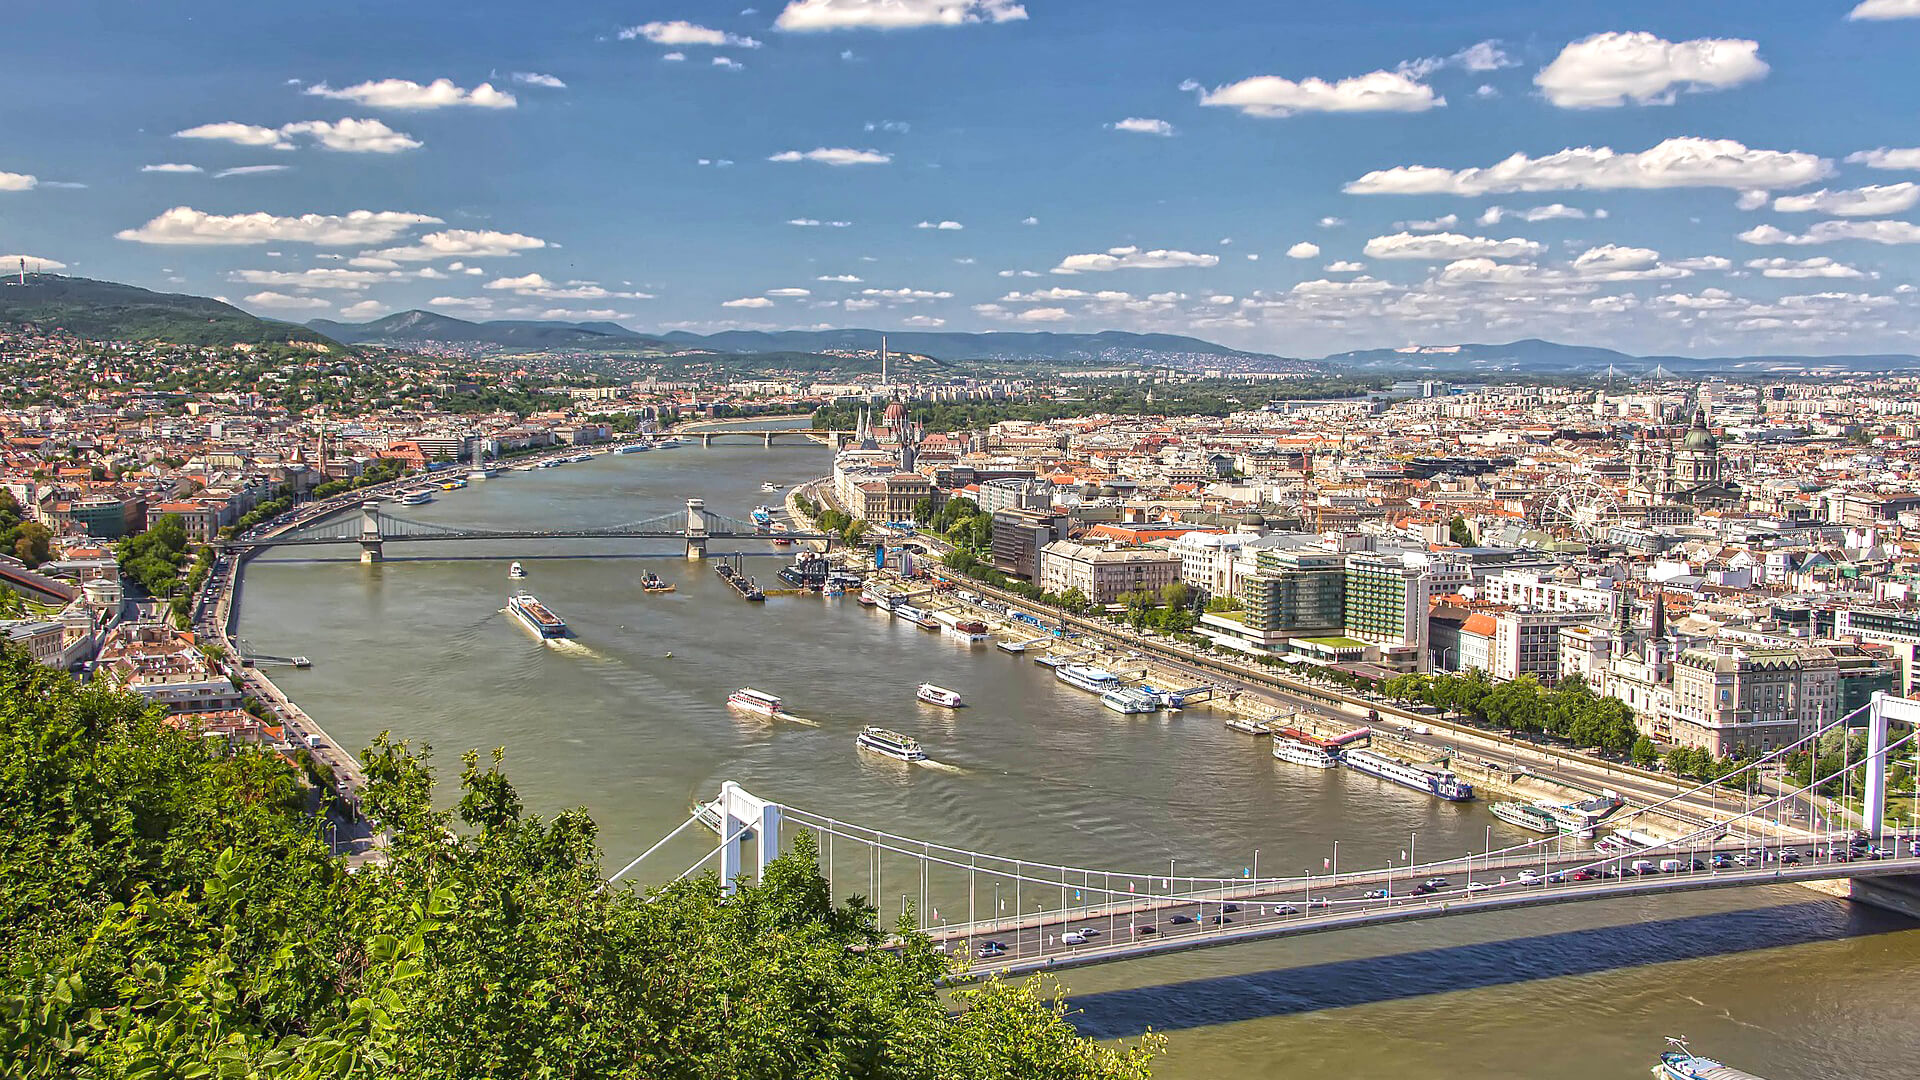 The Danube River divides Budapest into two parts